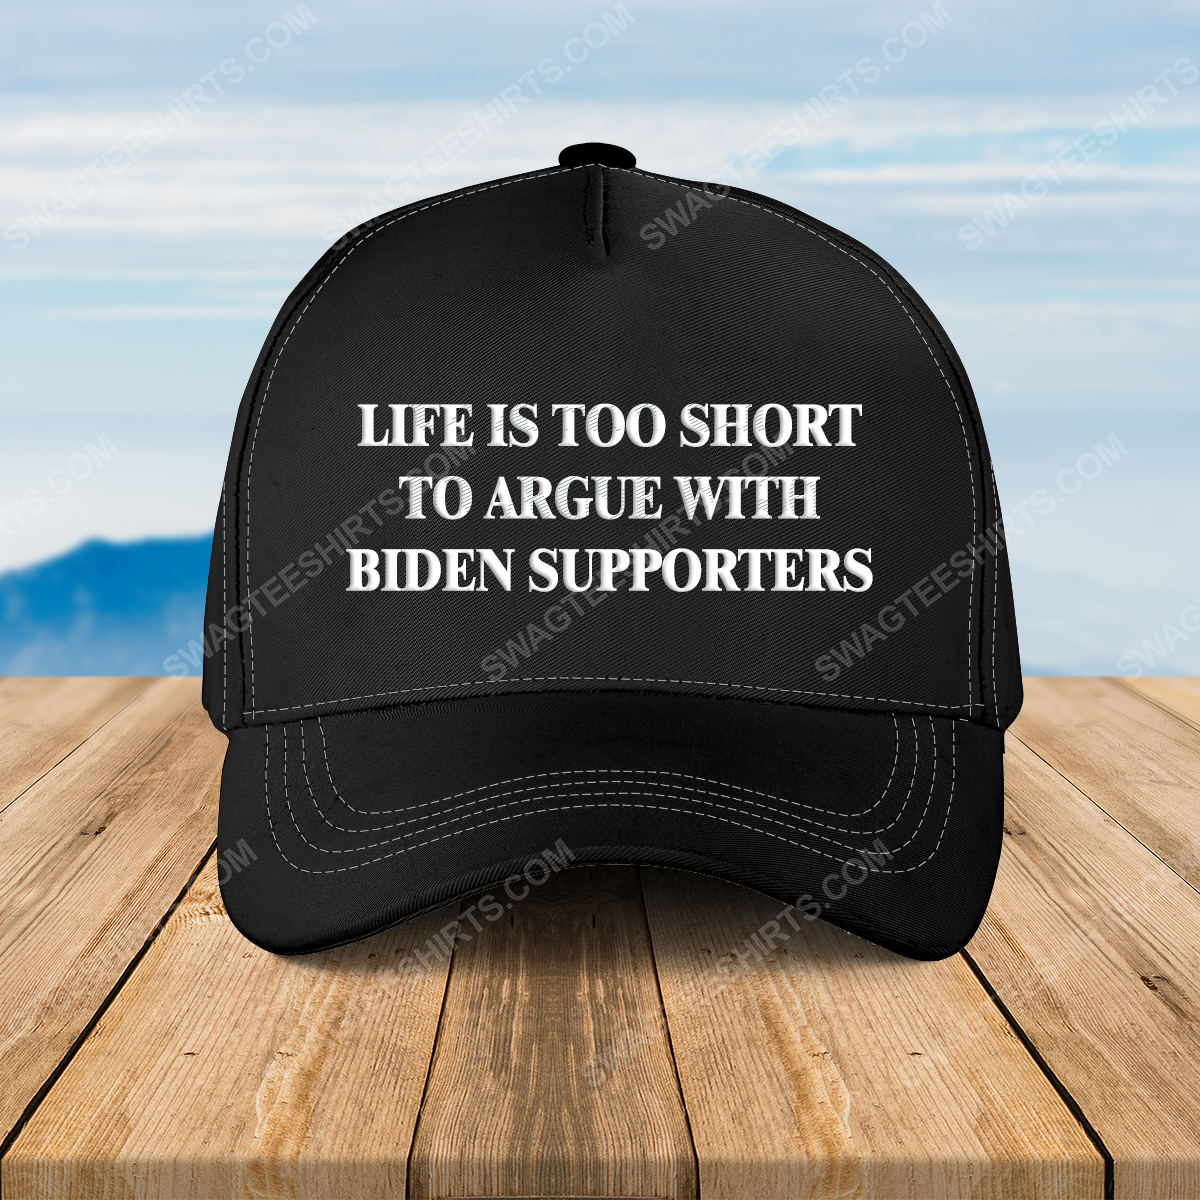 Life is too short to argue with biden supporters full print classic hat 1 - Copy (3)